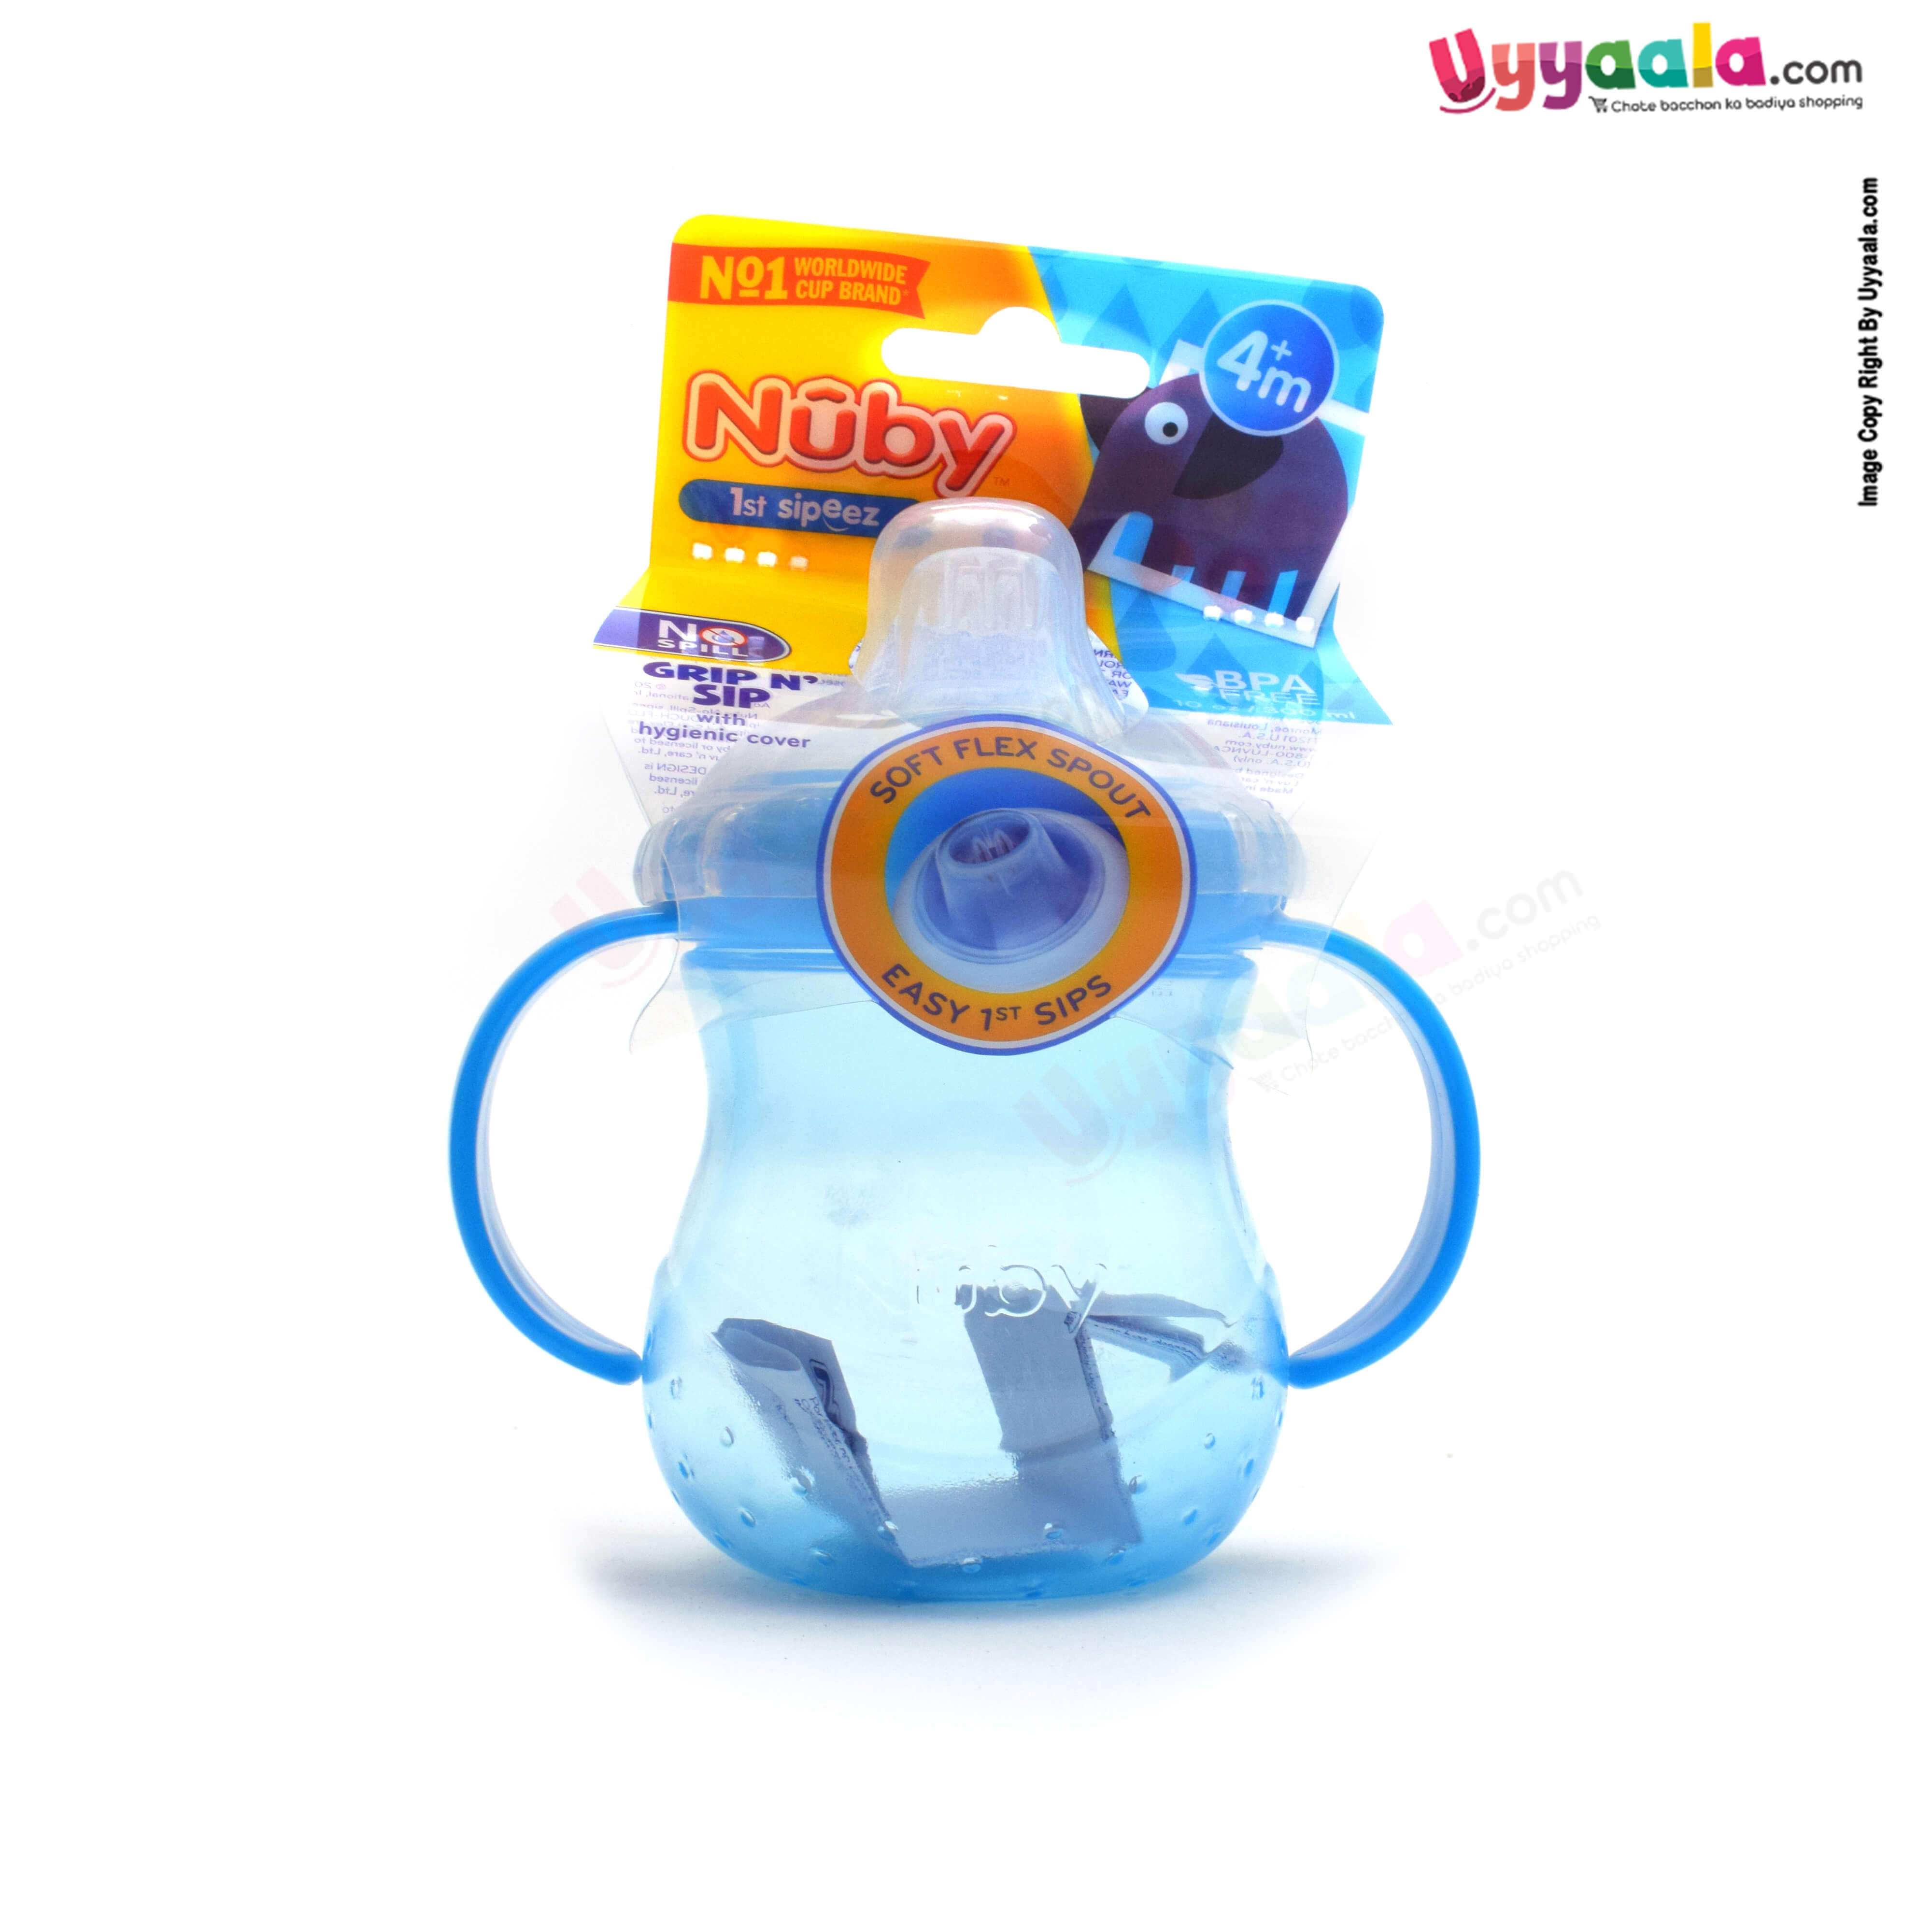 NUBY 1st Sipeez 'Grip n Sip' With Hygienic Cover Sipper Soft Flex Spout 300ml 4+m Age